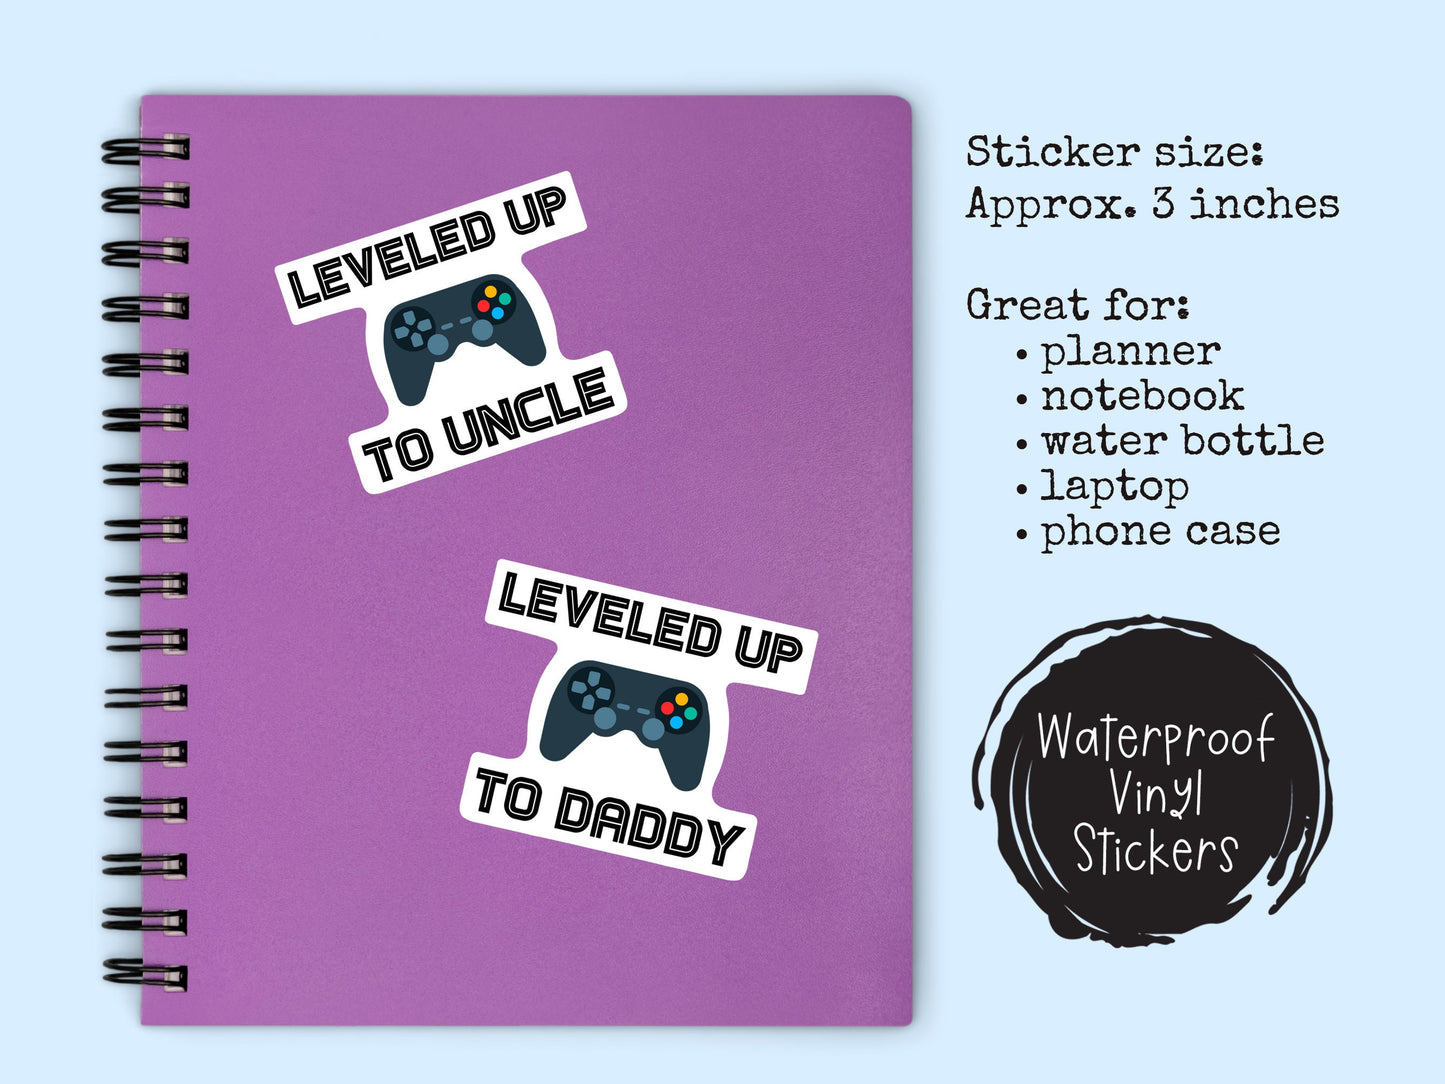 Video Gamer Dad Sticker New Dad Funny Uncle Father-To-Be Video Gaming